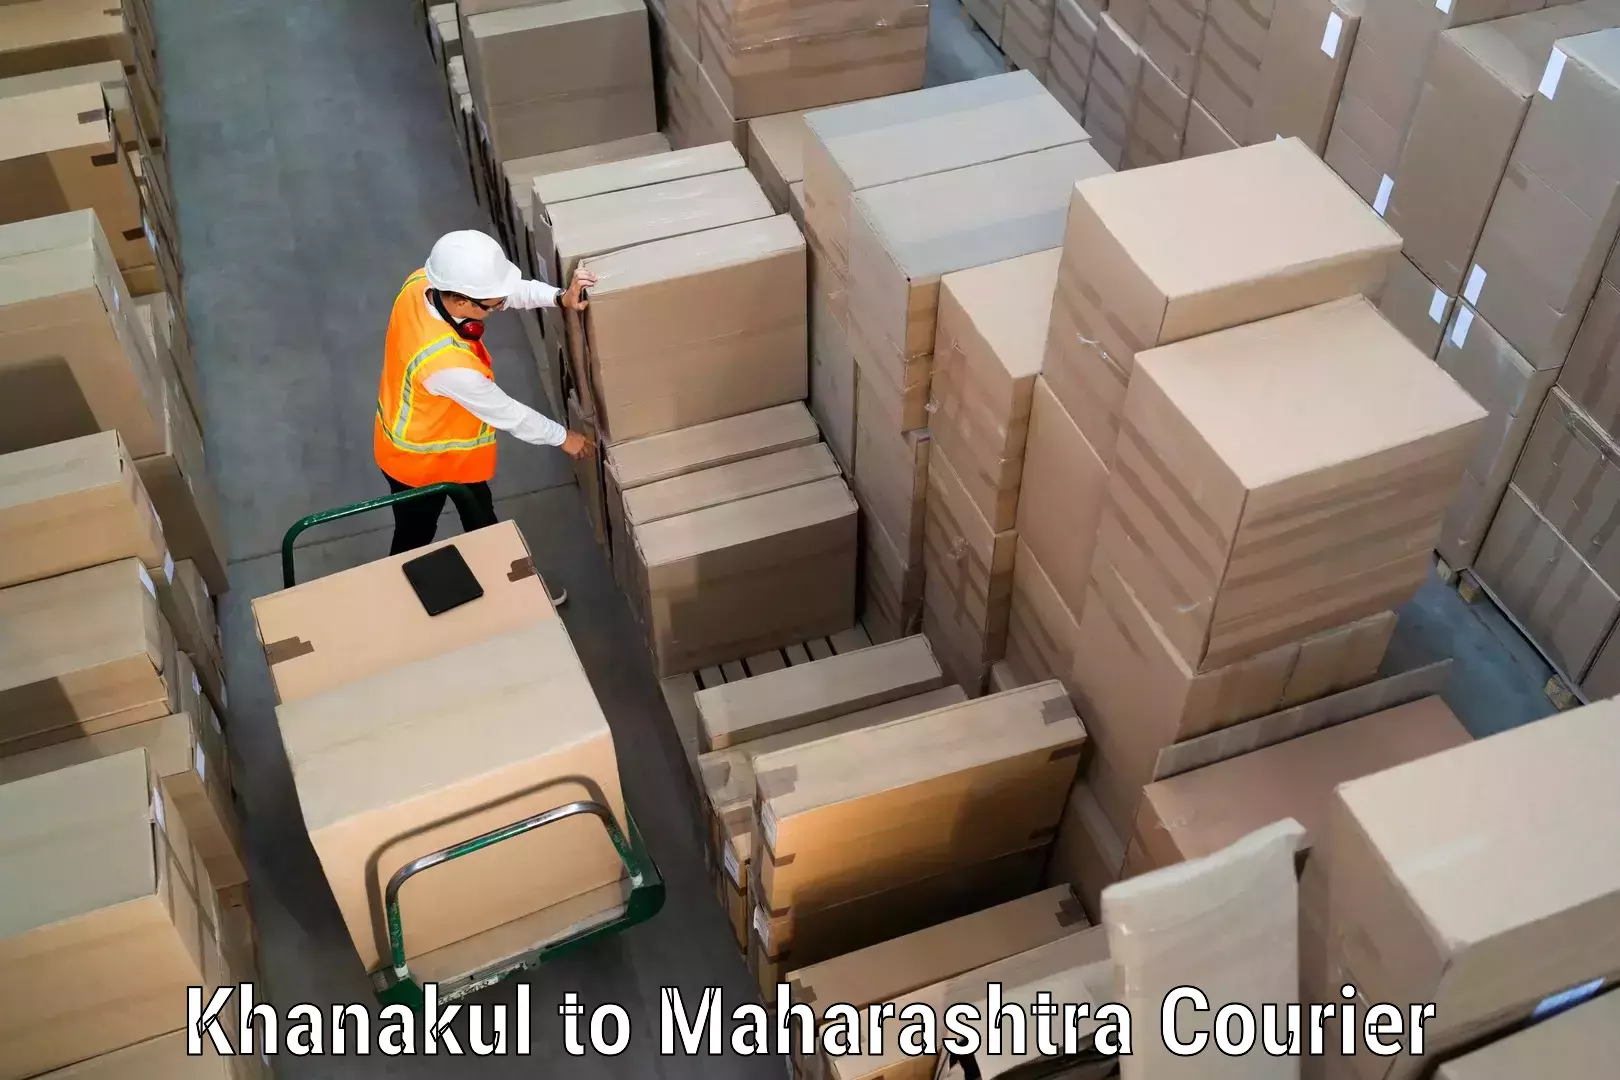 Specialized courier services in Khanakul to Maharashtra